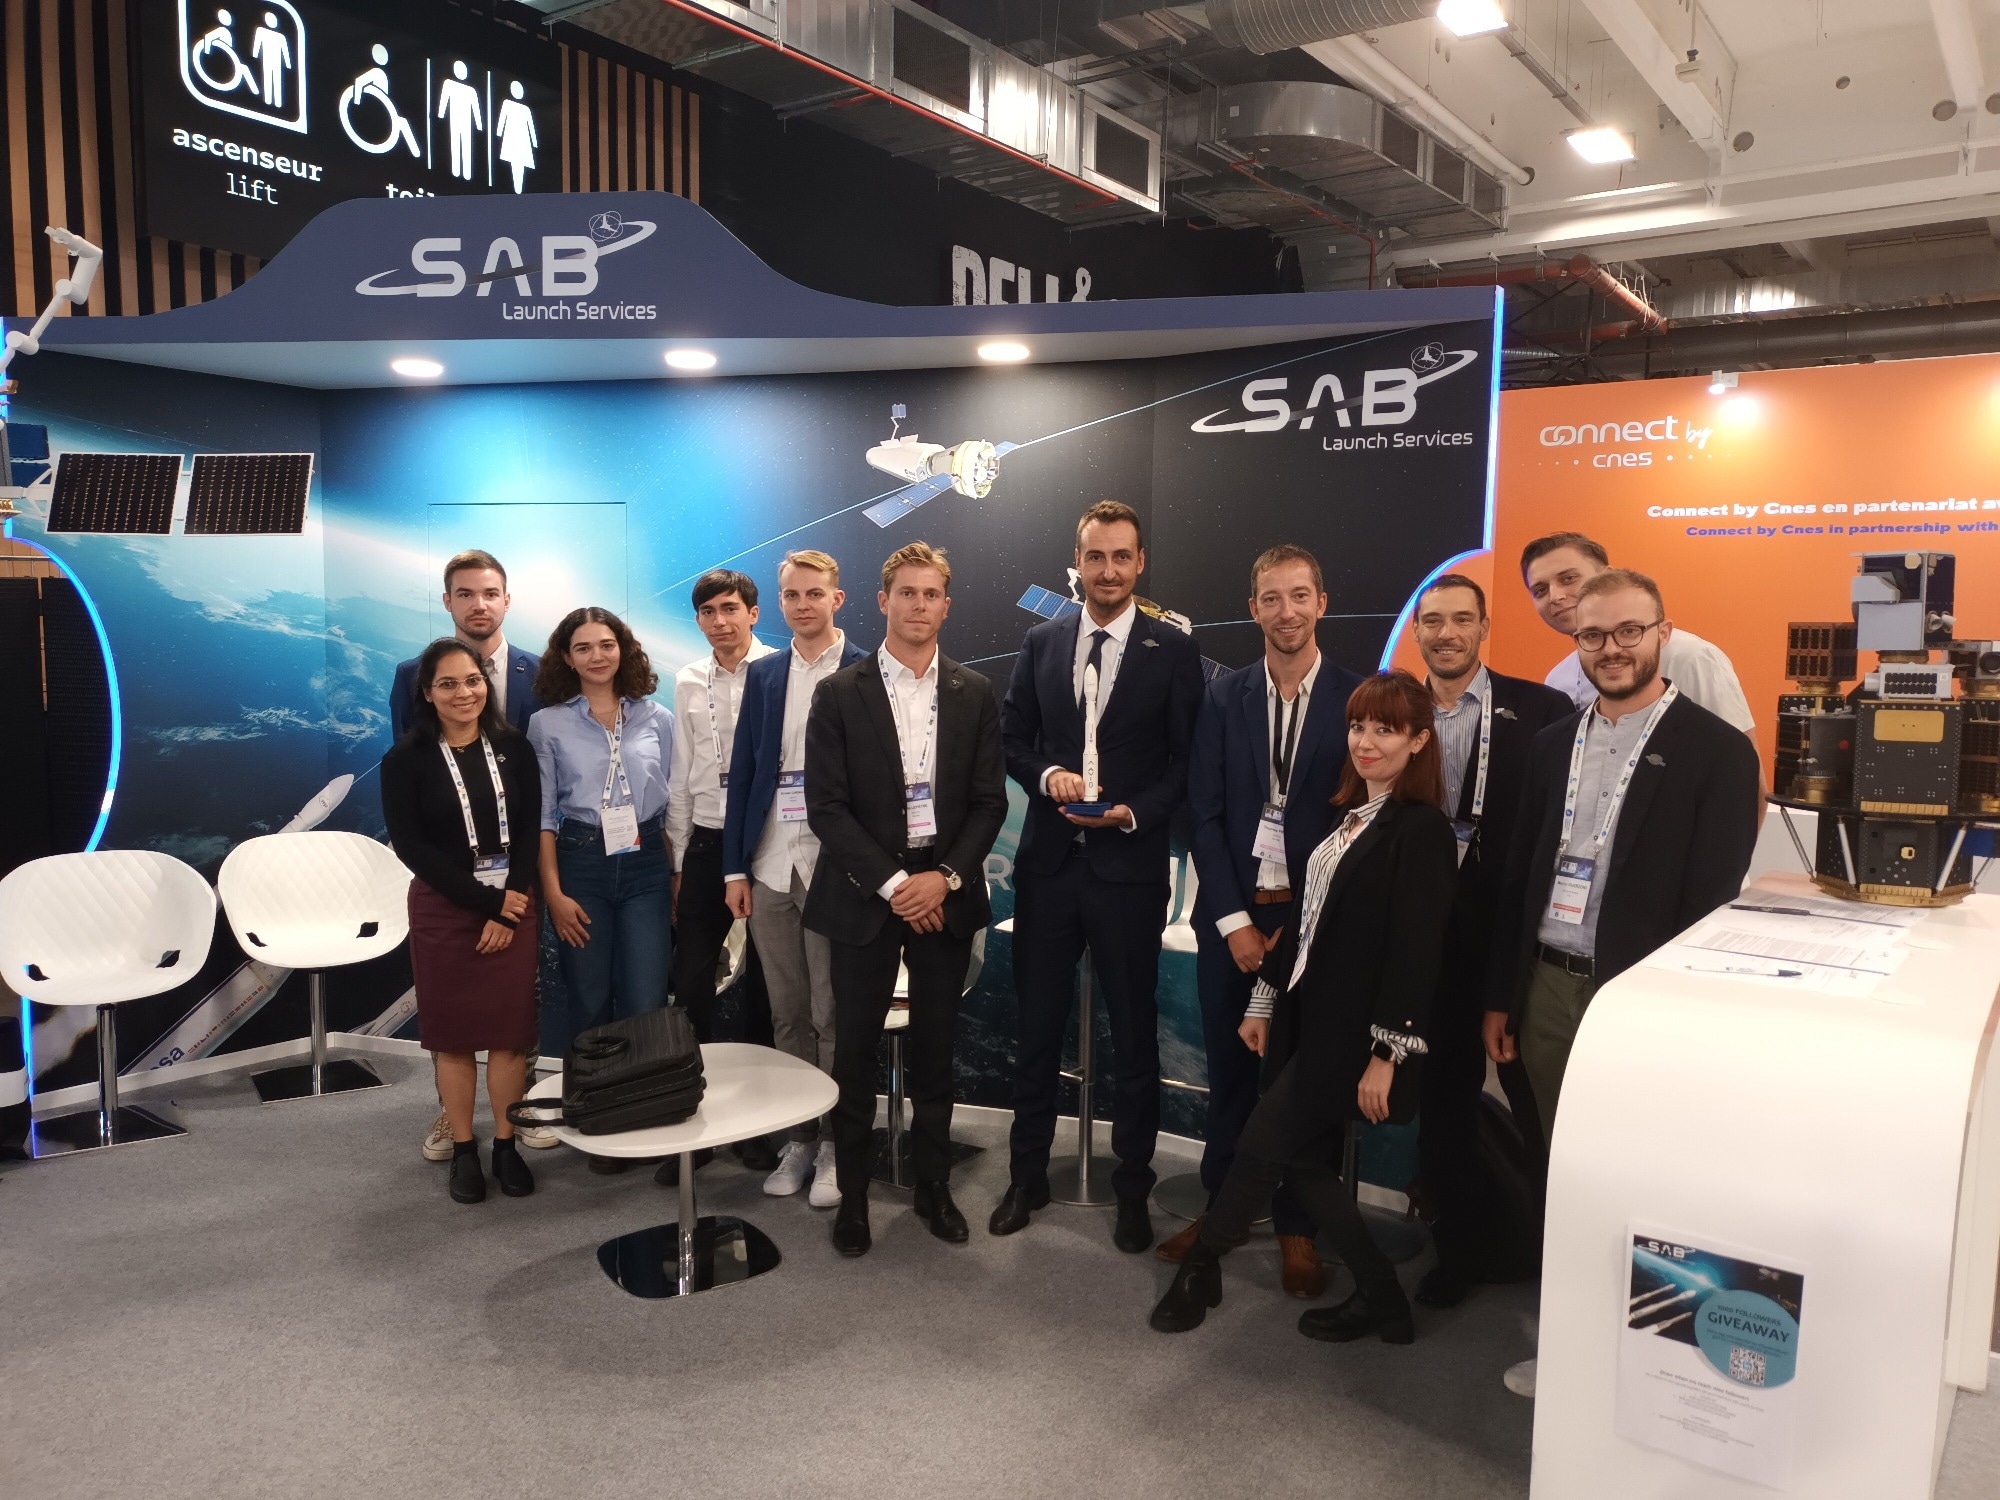 SAB Launch Services Awarded Contract to Launch Two ICEYE SAR Satellites